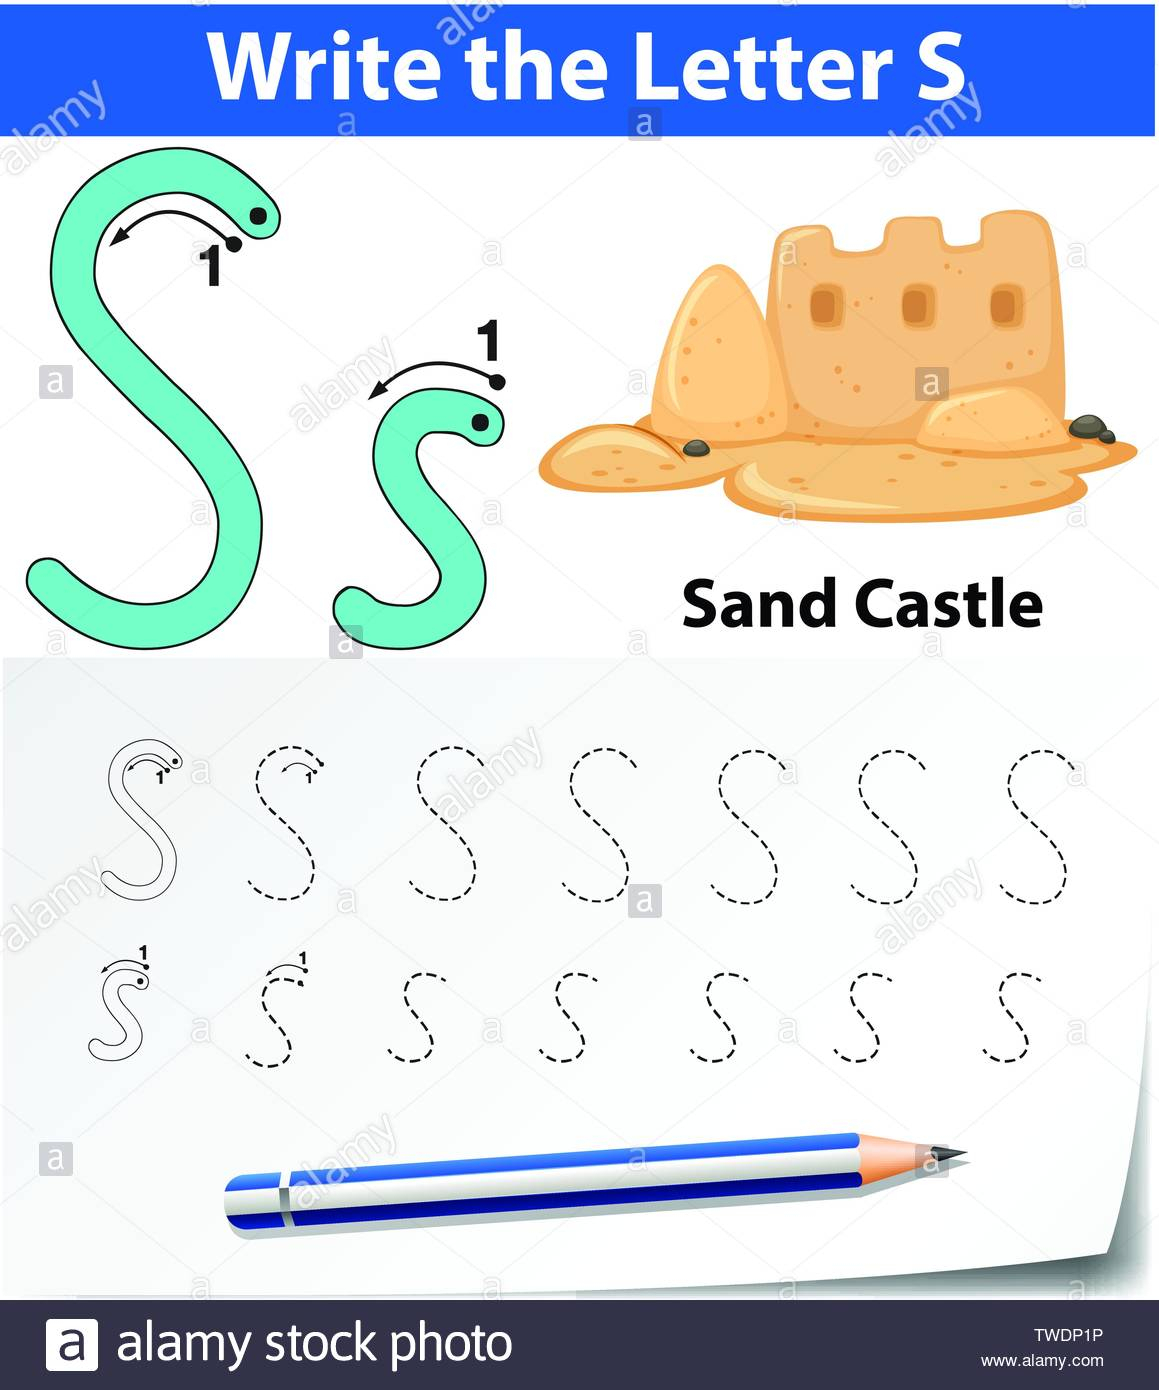 Letter S Tracing Alphabet Worksheets Illustration Stock in Sand Tracing Letters